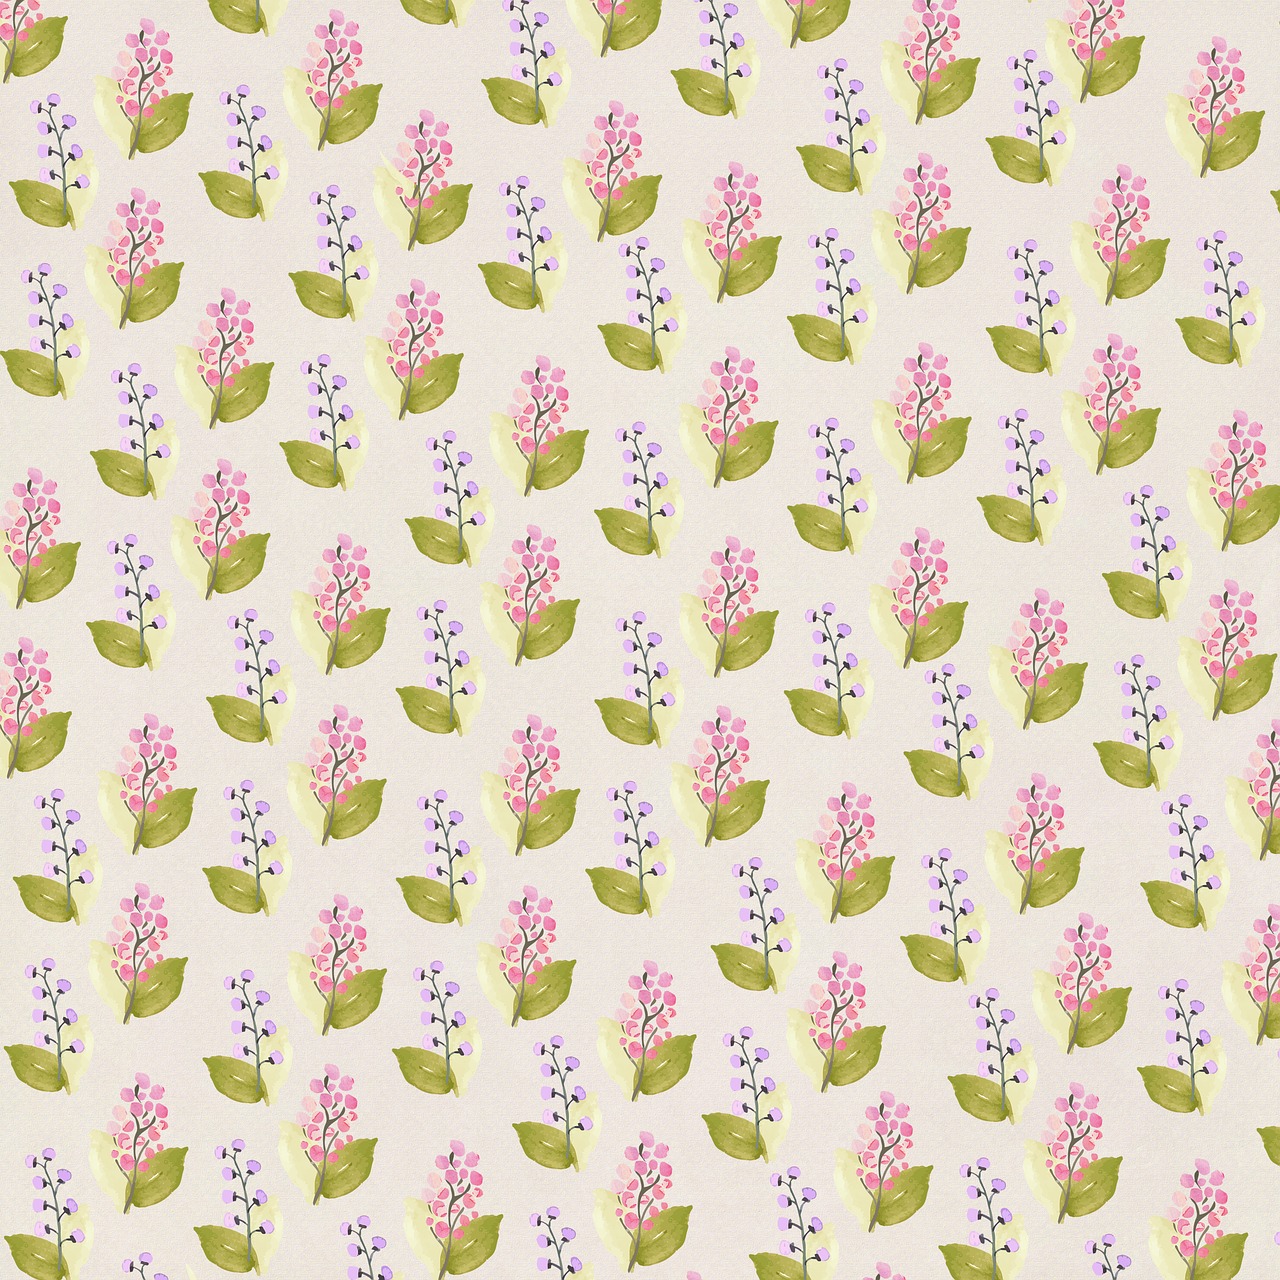 floral pattern floral background floral paper free photo